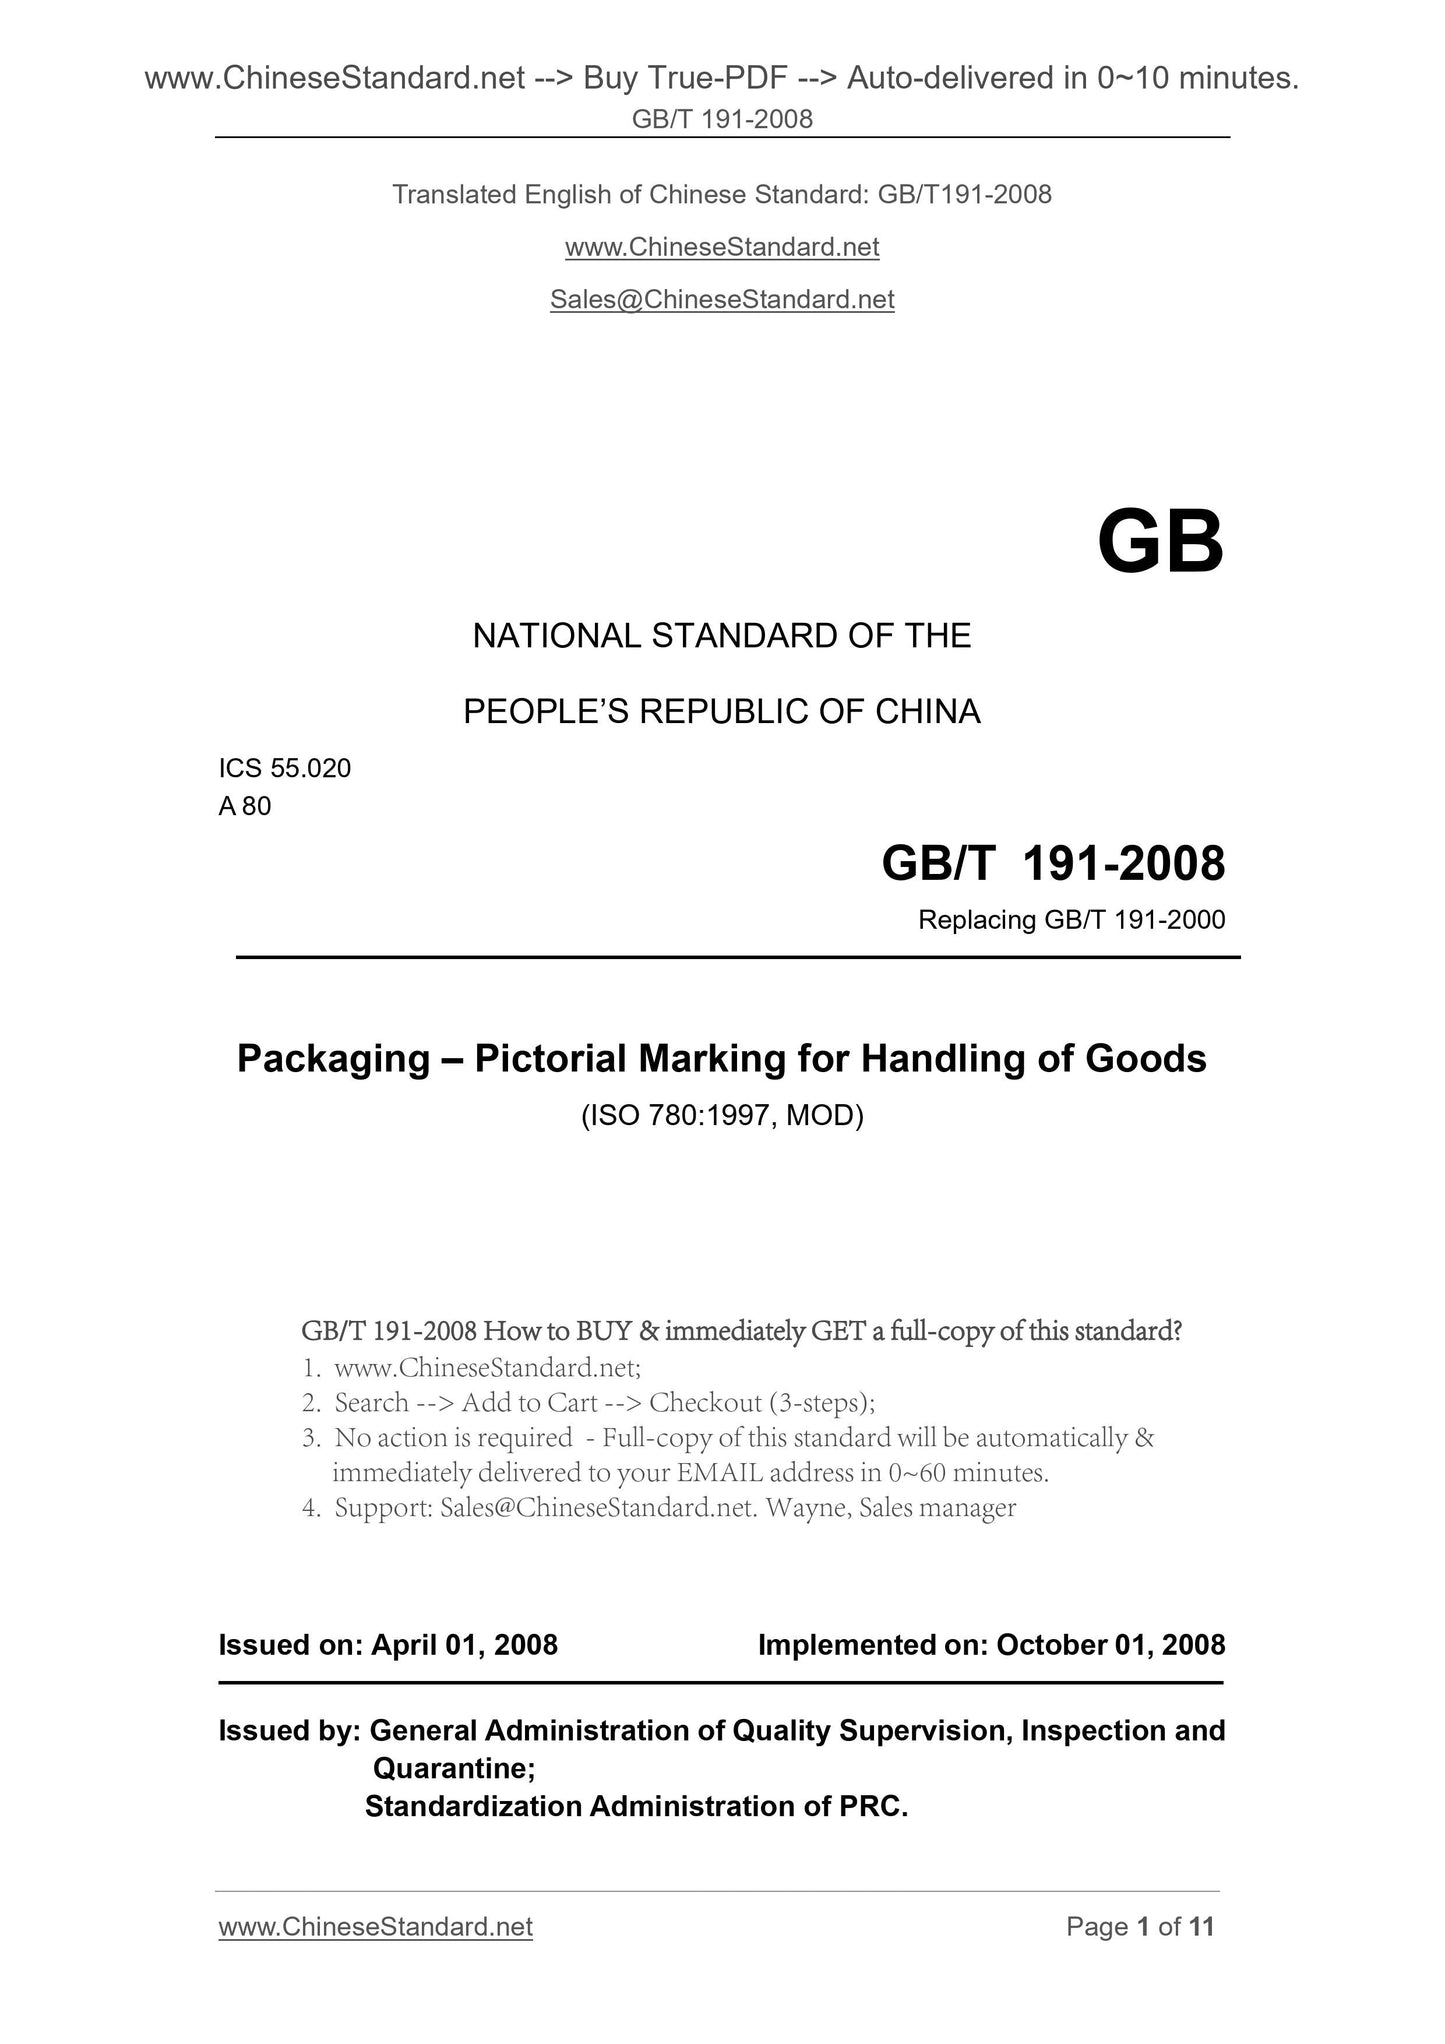 GB/T 191-2008 Page 1